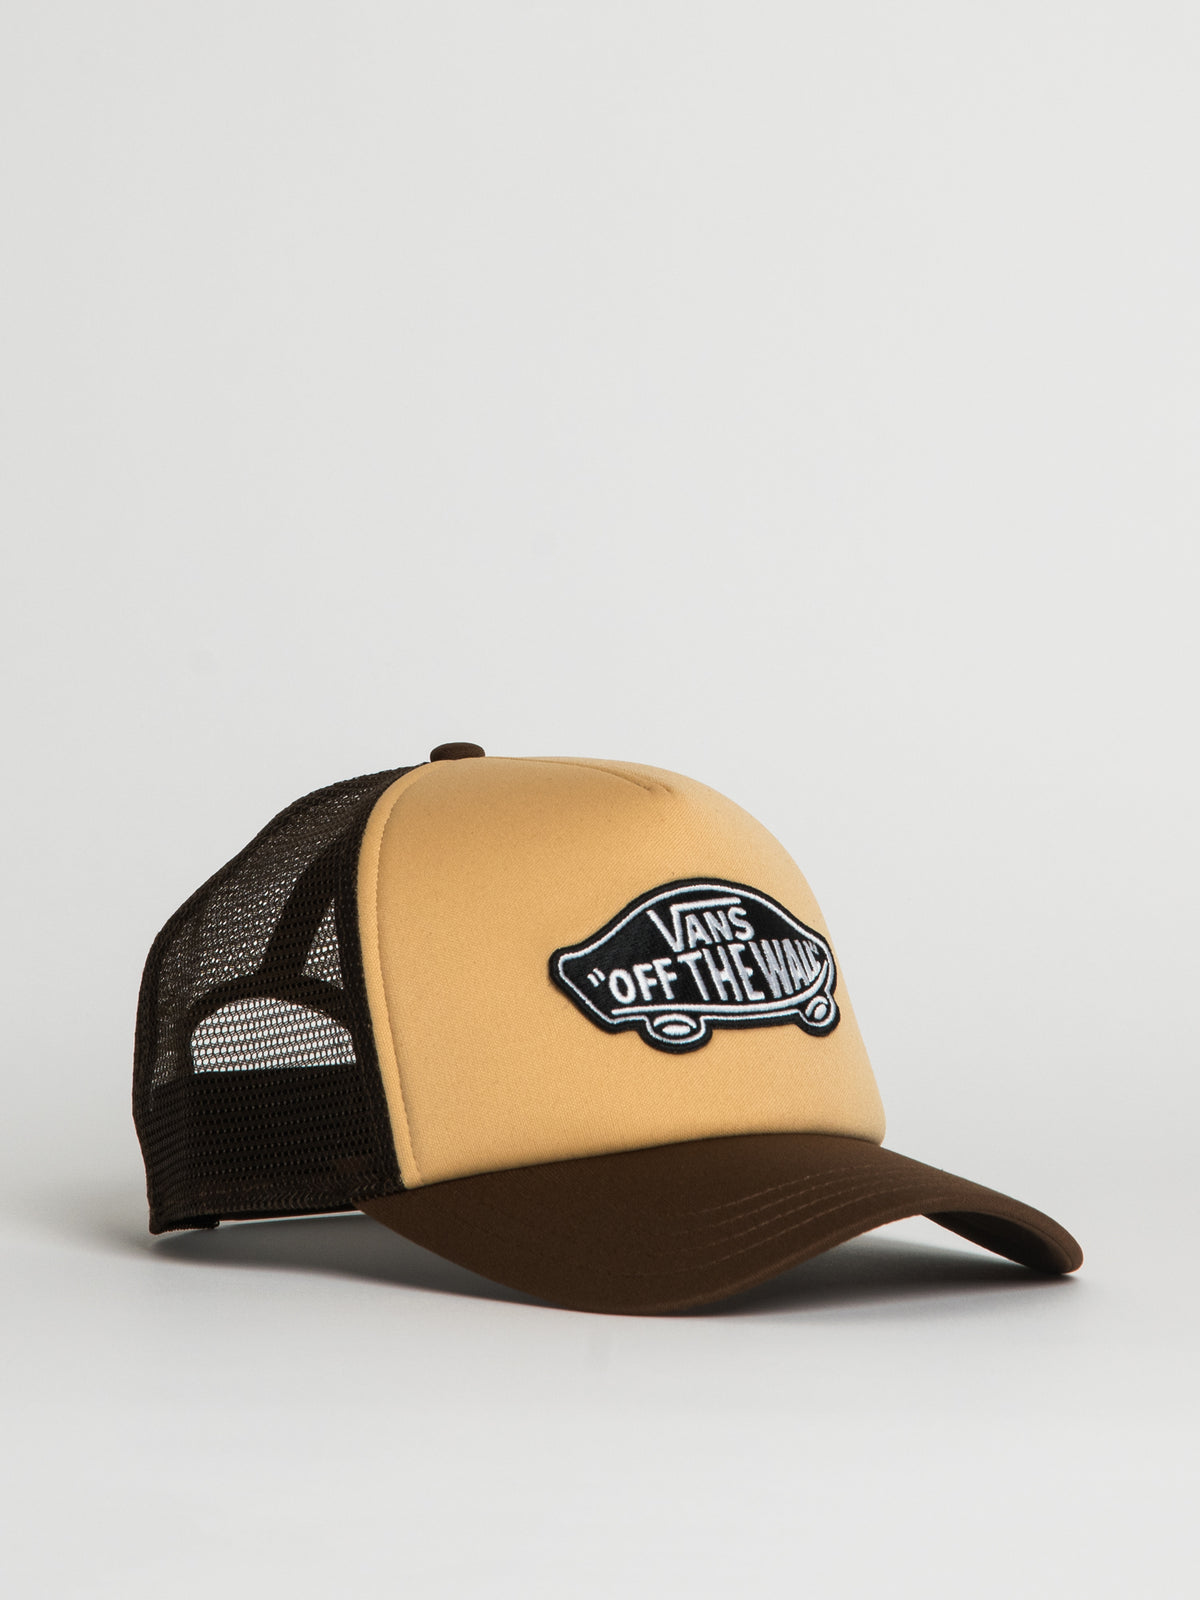 Collective PATCH VANS | HAT Footwear CURVED BILL TRUCKER CLASSIC Boathouse